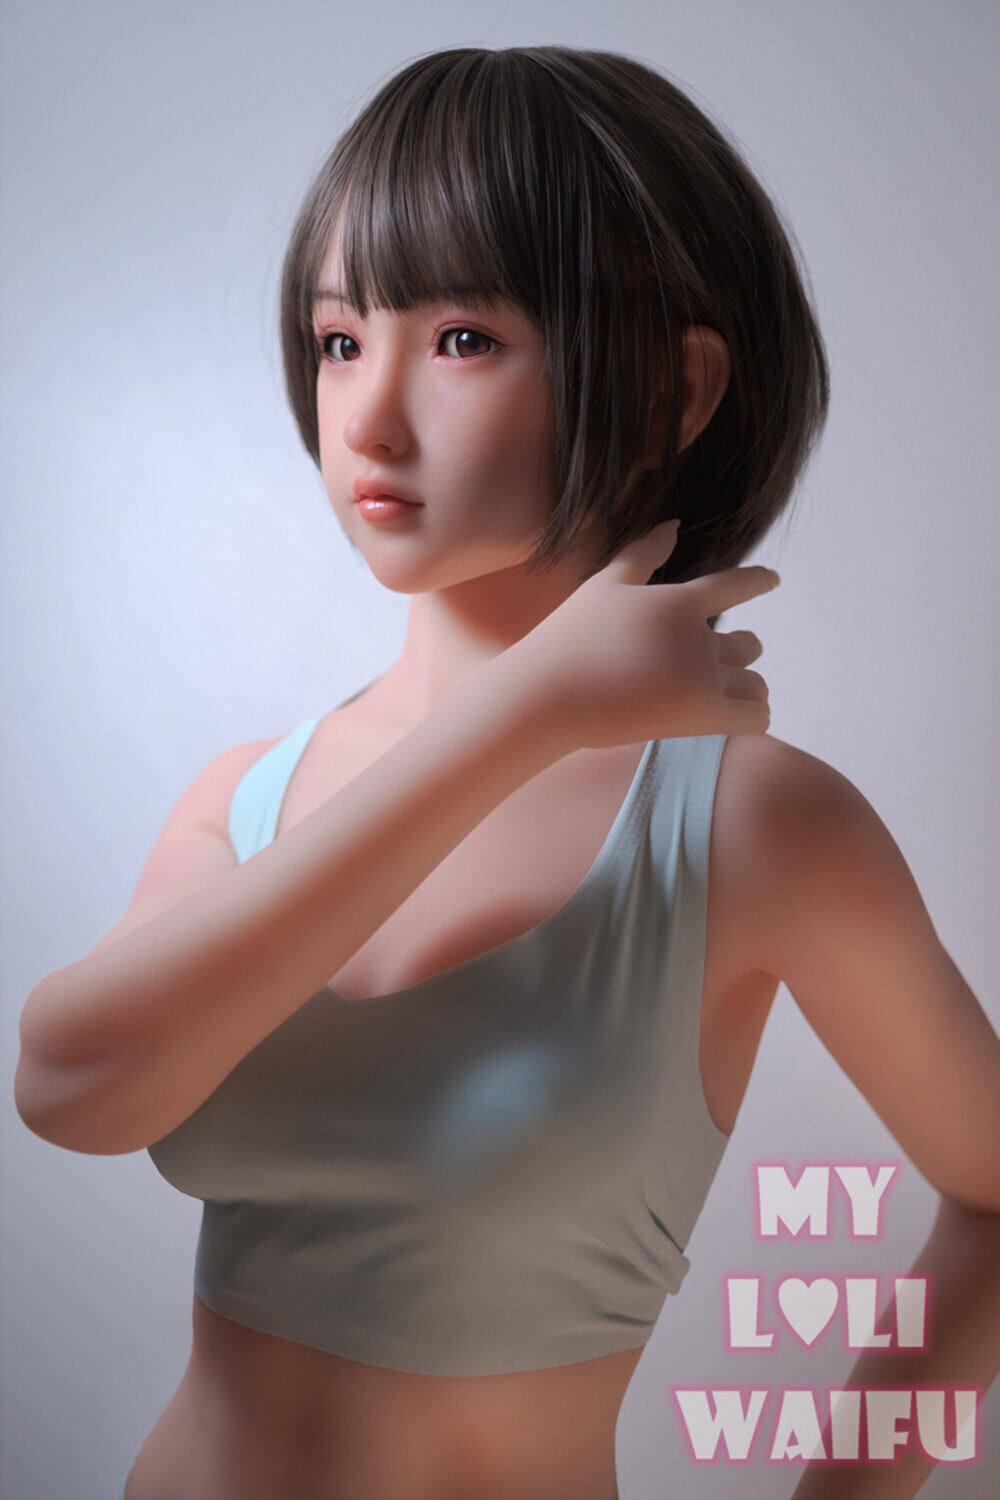 Eliyah-148cm(4ft10) MLW Adult Doll B-Cup Normal Skin Tone Big Boobs Silicone Dolls image5